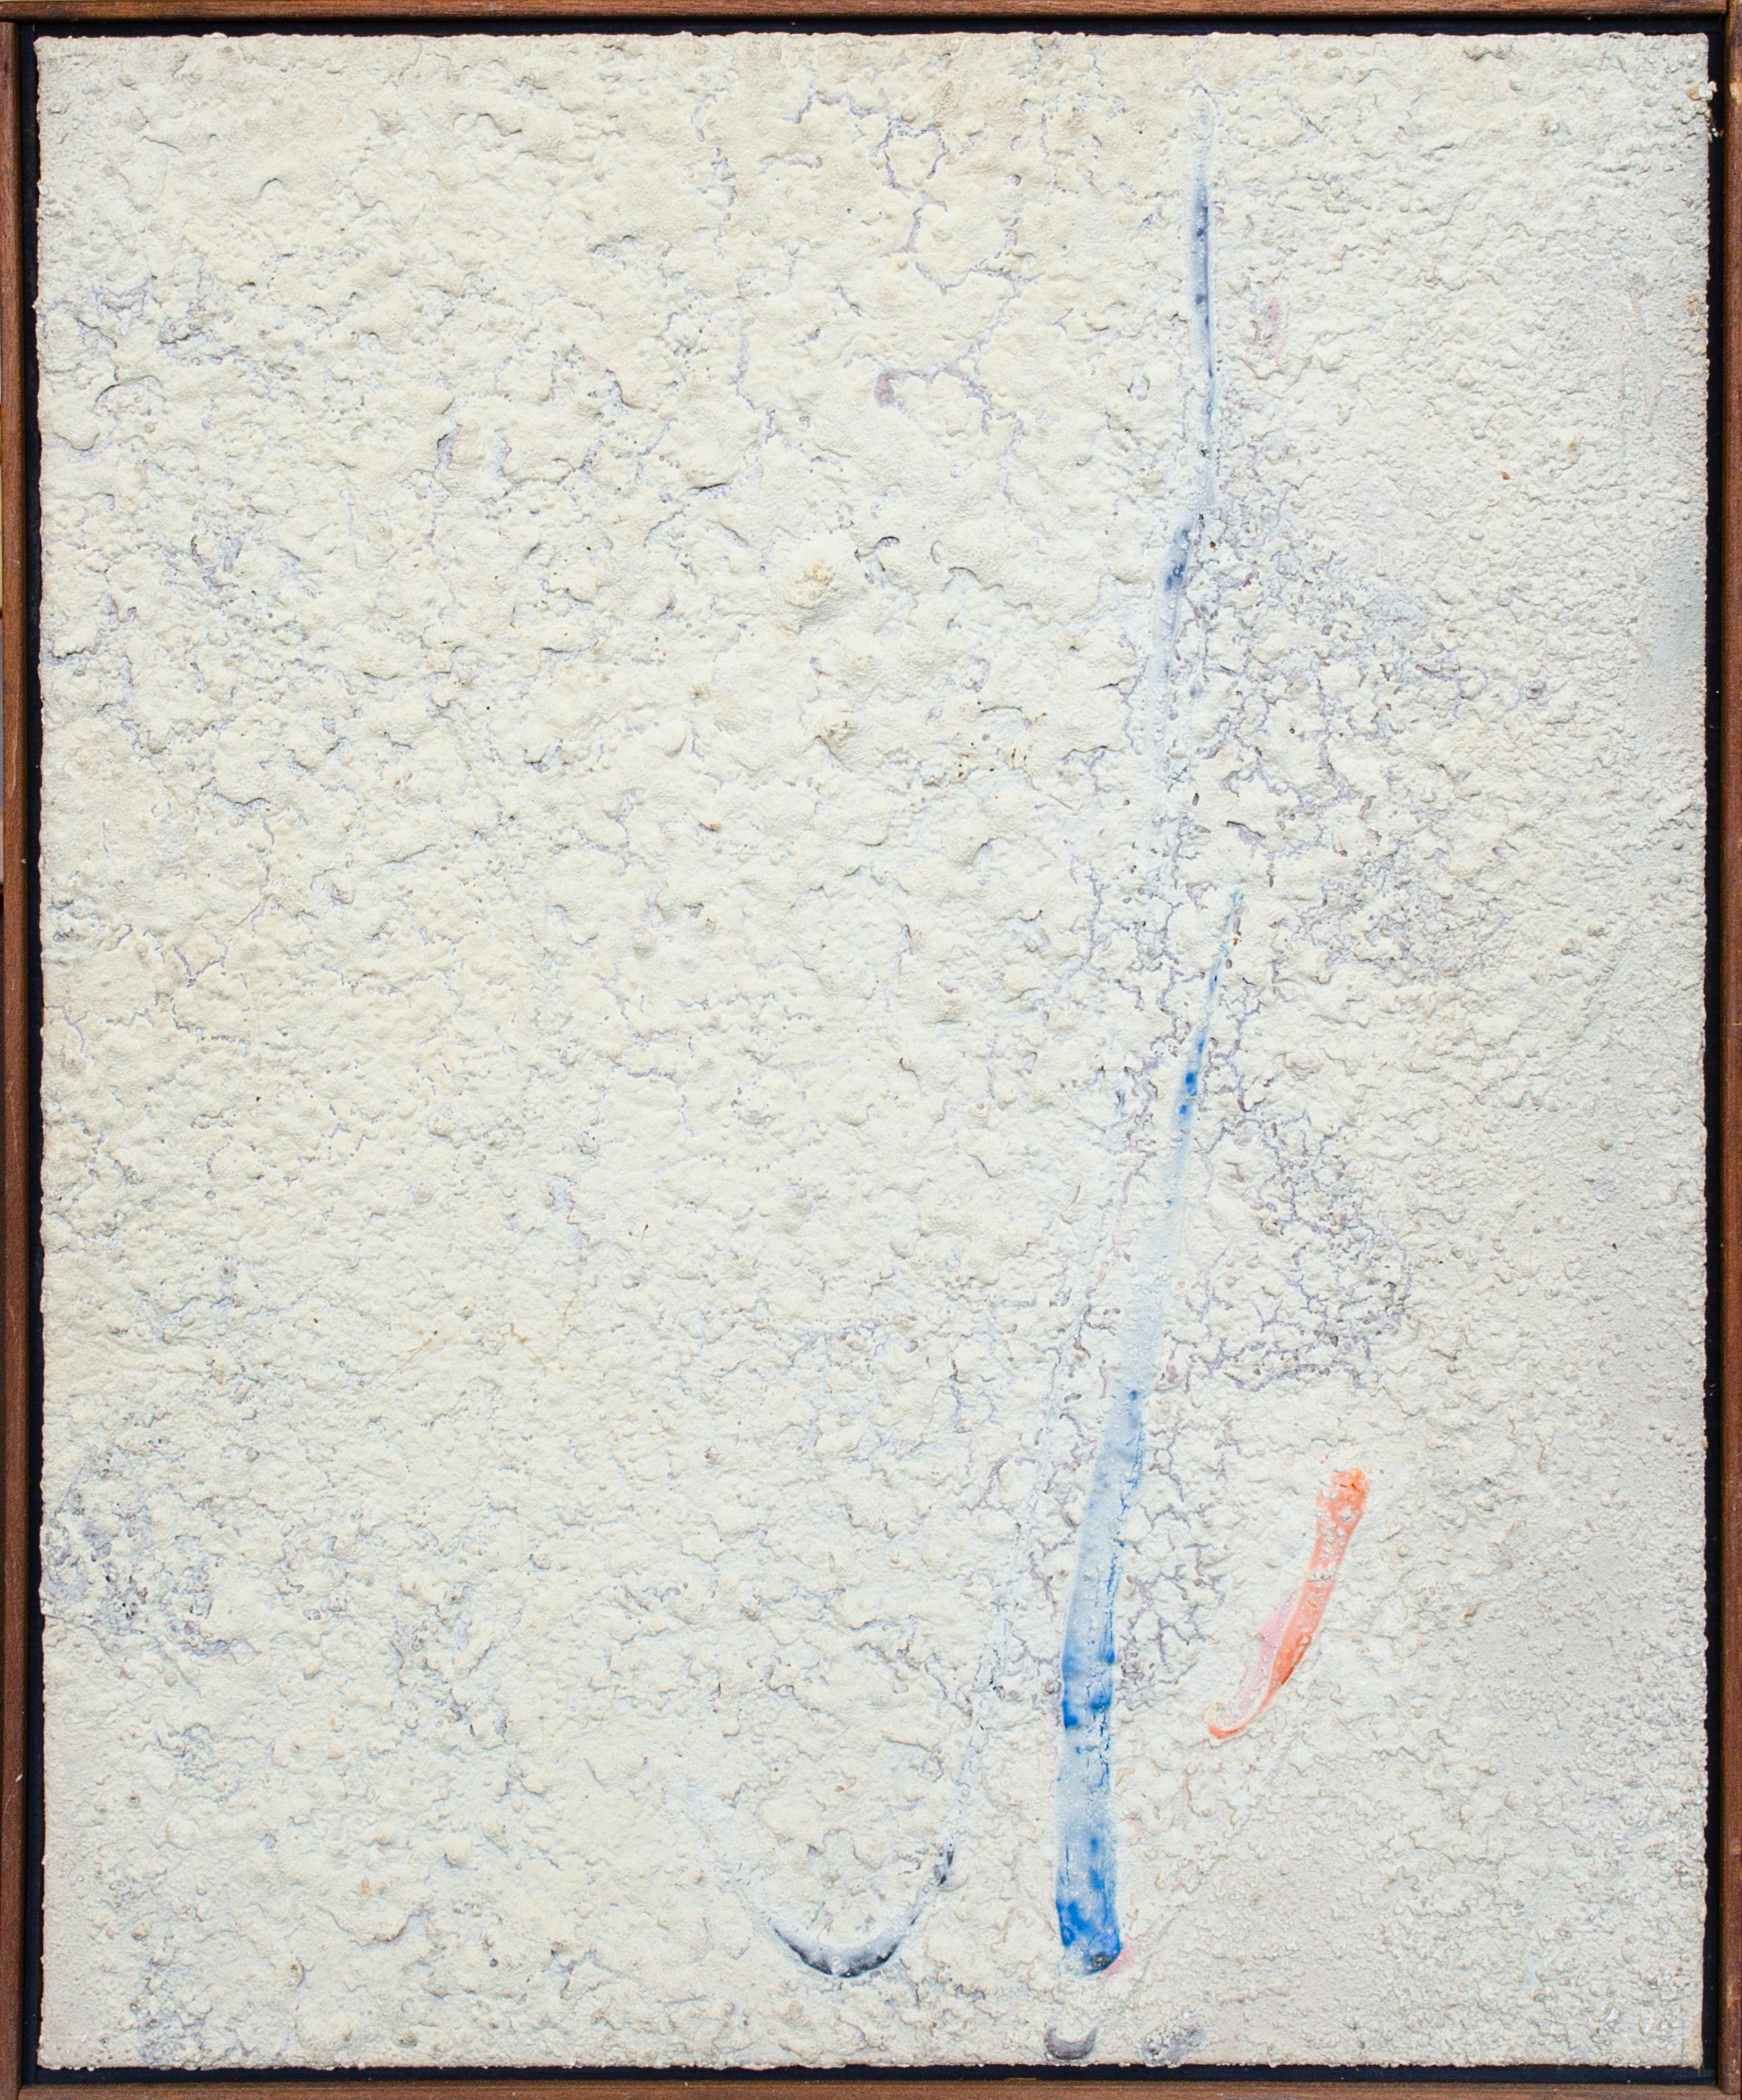 SHERRON FRANCIS (AMERICAN, B. 1940)
Untitled, 1977
Acrylic on canvas
33 x 27 1/2 inches
Signed, titled and dated on the reverse

A reappraisal is long overdue for the second-generation abstract expressionists. Artists such as Helen Frankenthaler,